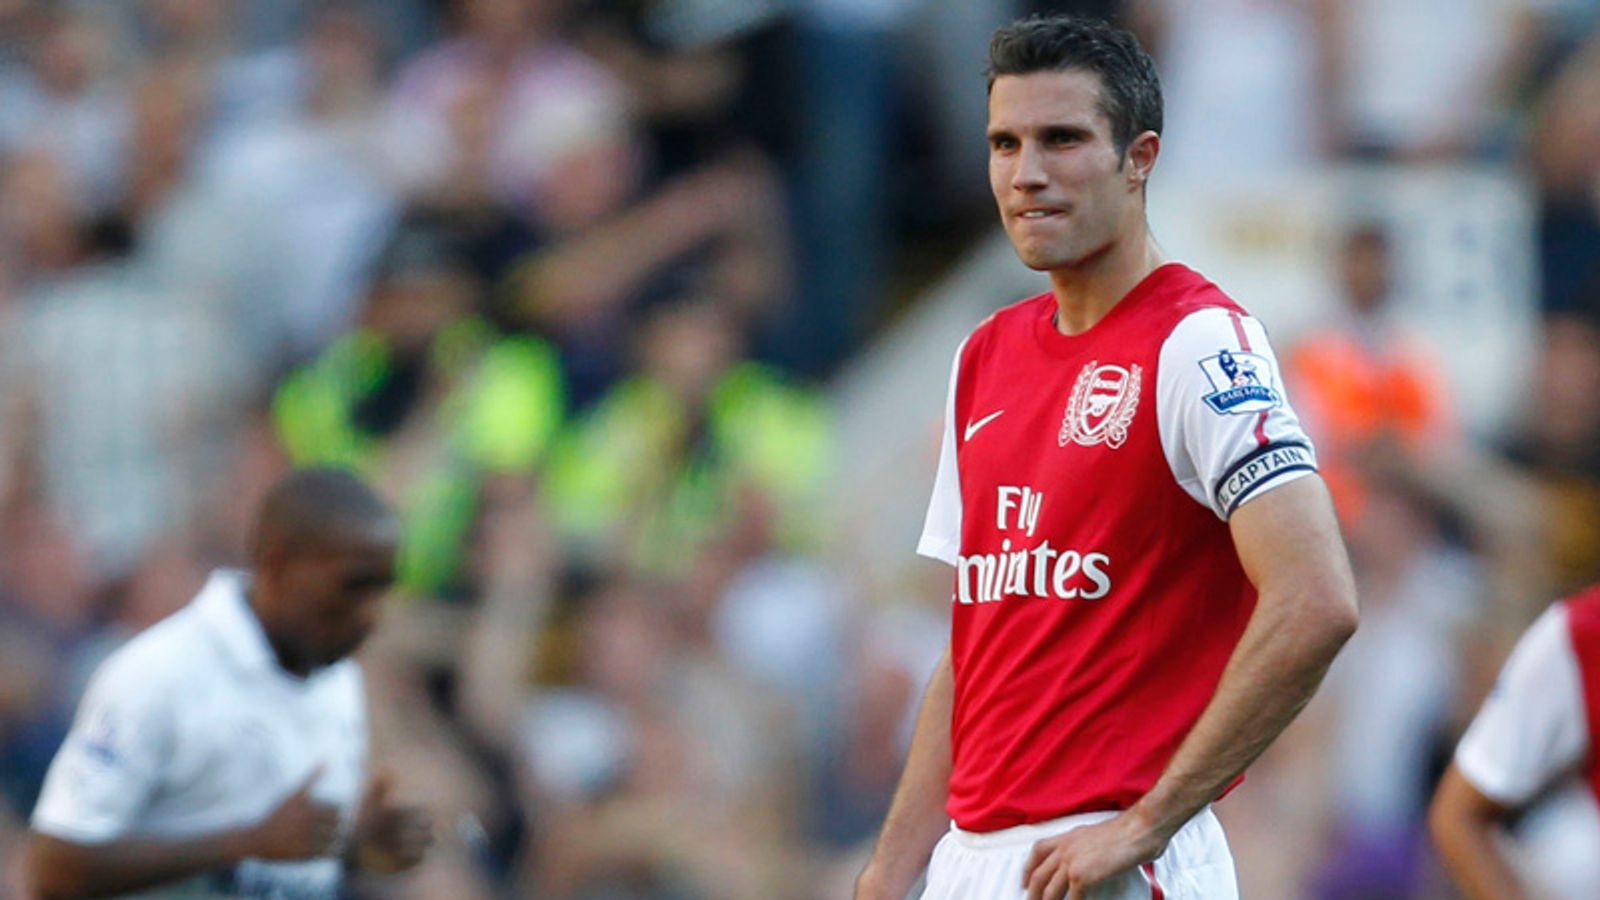 Vermaelen Wanted Van Persie to Stay with Arsenal in 2012 till He Was a Club Legend